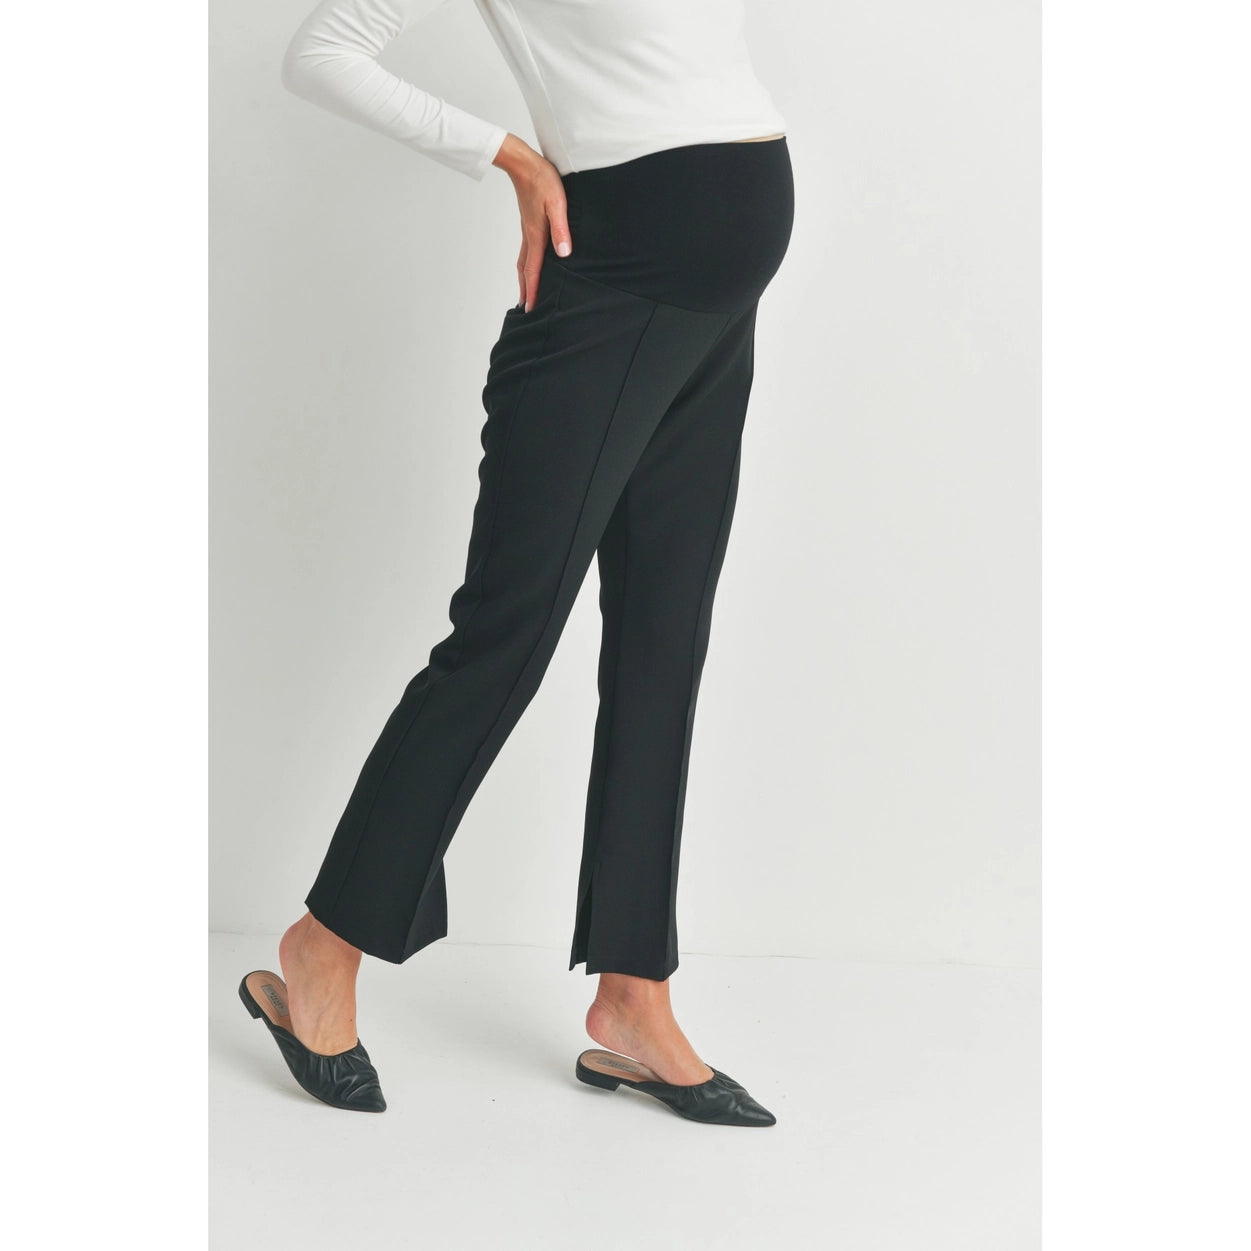 Bootcut Maternity Pant with Slit